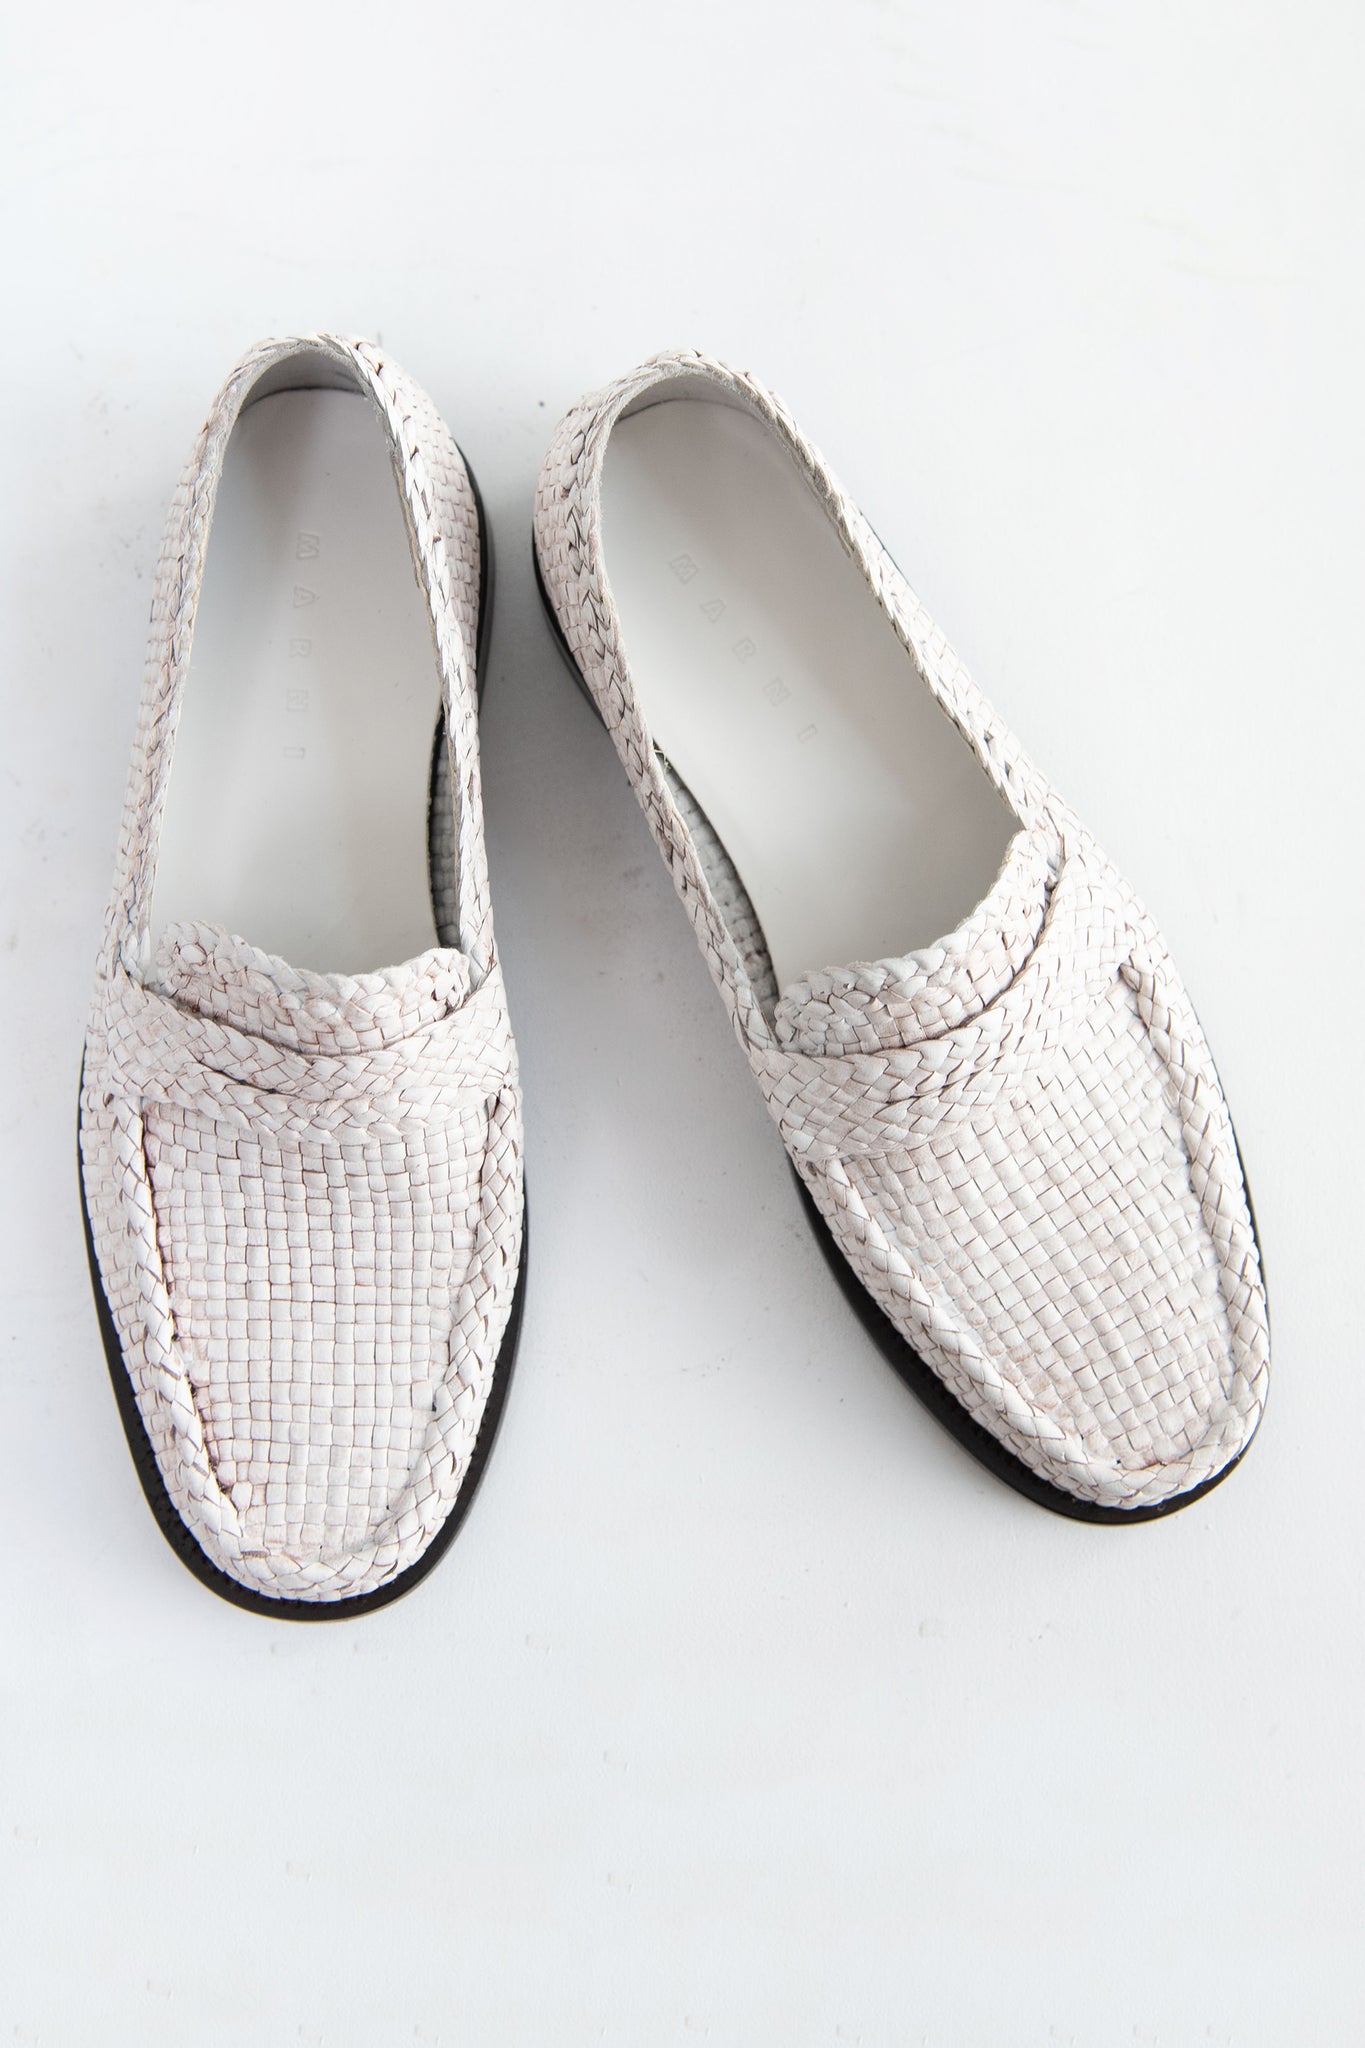 MARNI - Woven Leather Bambi Loafer, Lily White